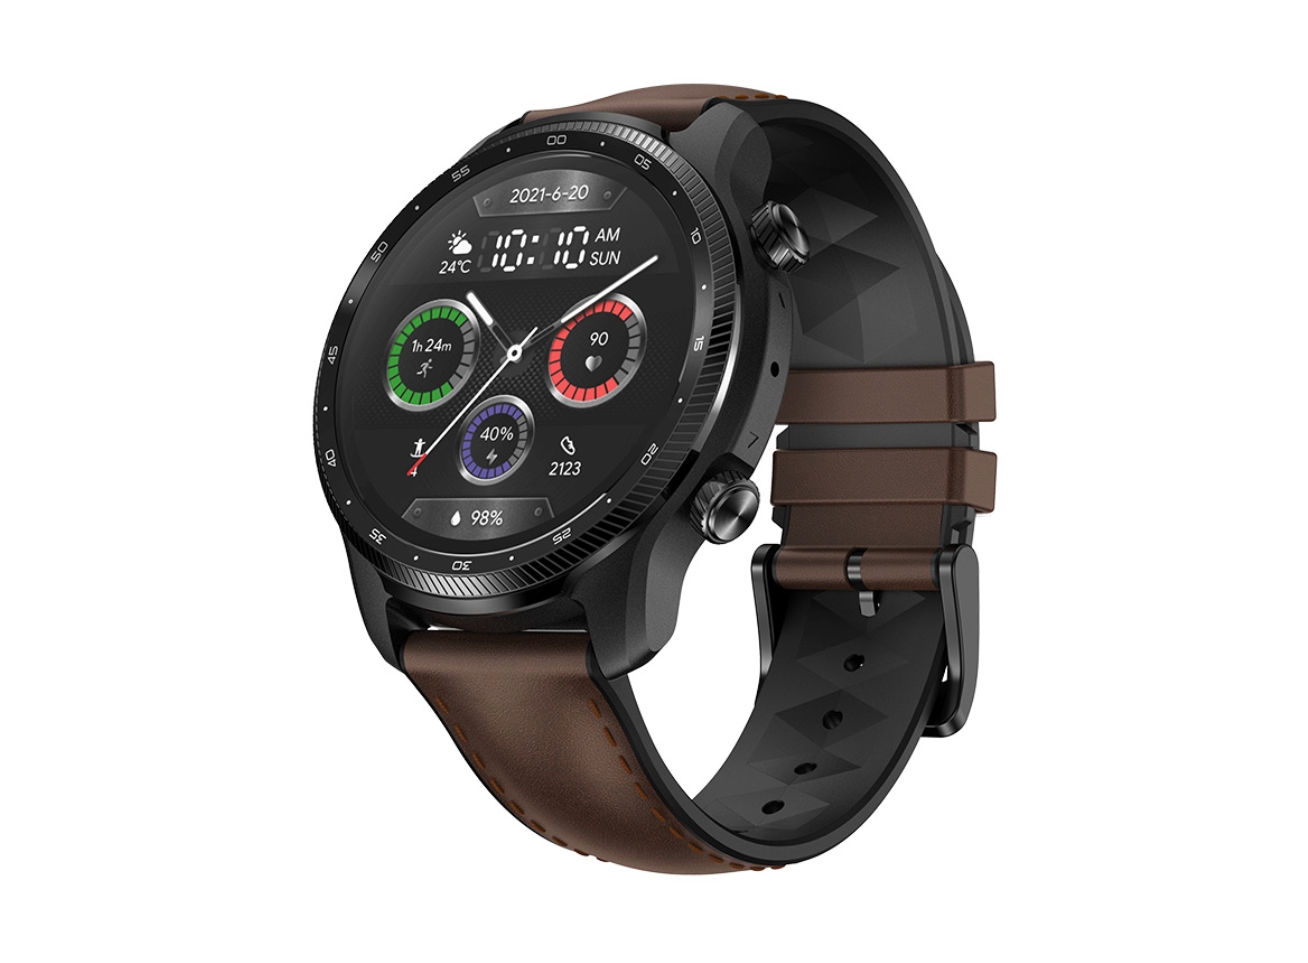 TicWatch Pro X: WearOS-based smartwatch with dual display, Snapdragon Wear 4100 chip, 1GB RAM, eSIM and battery life up to 45 days for $370